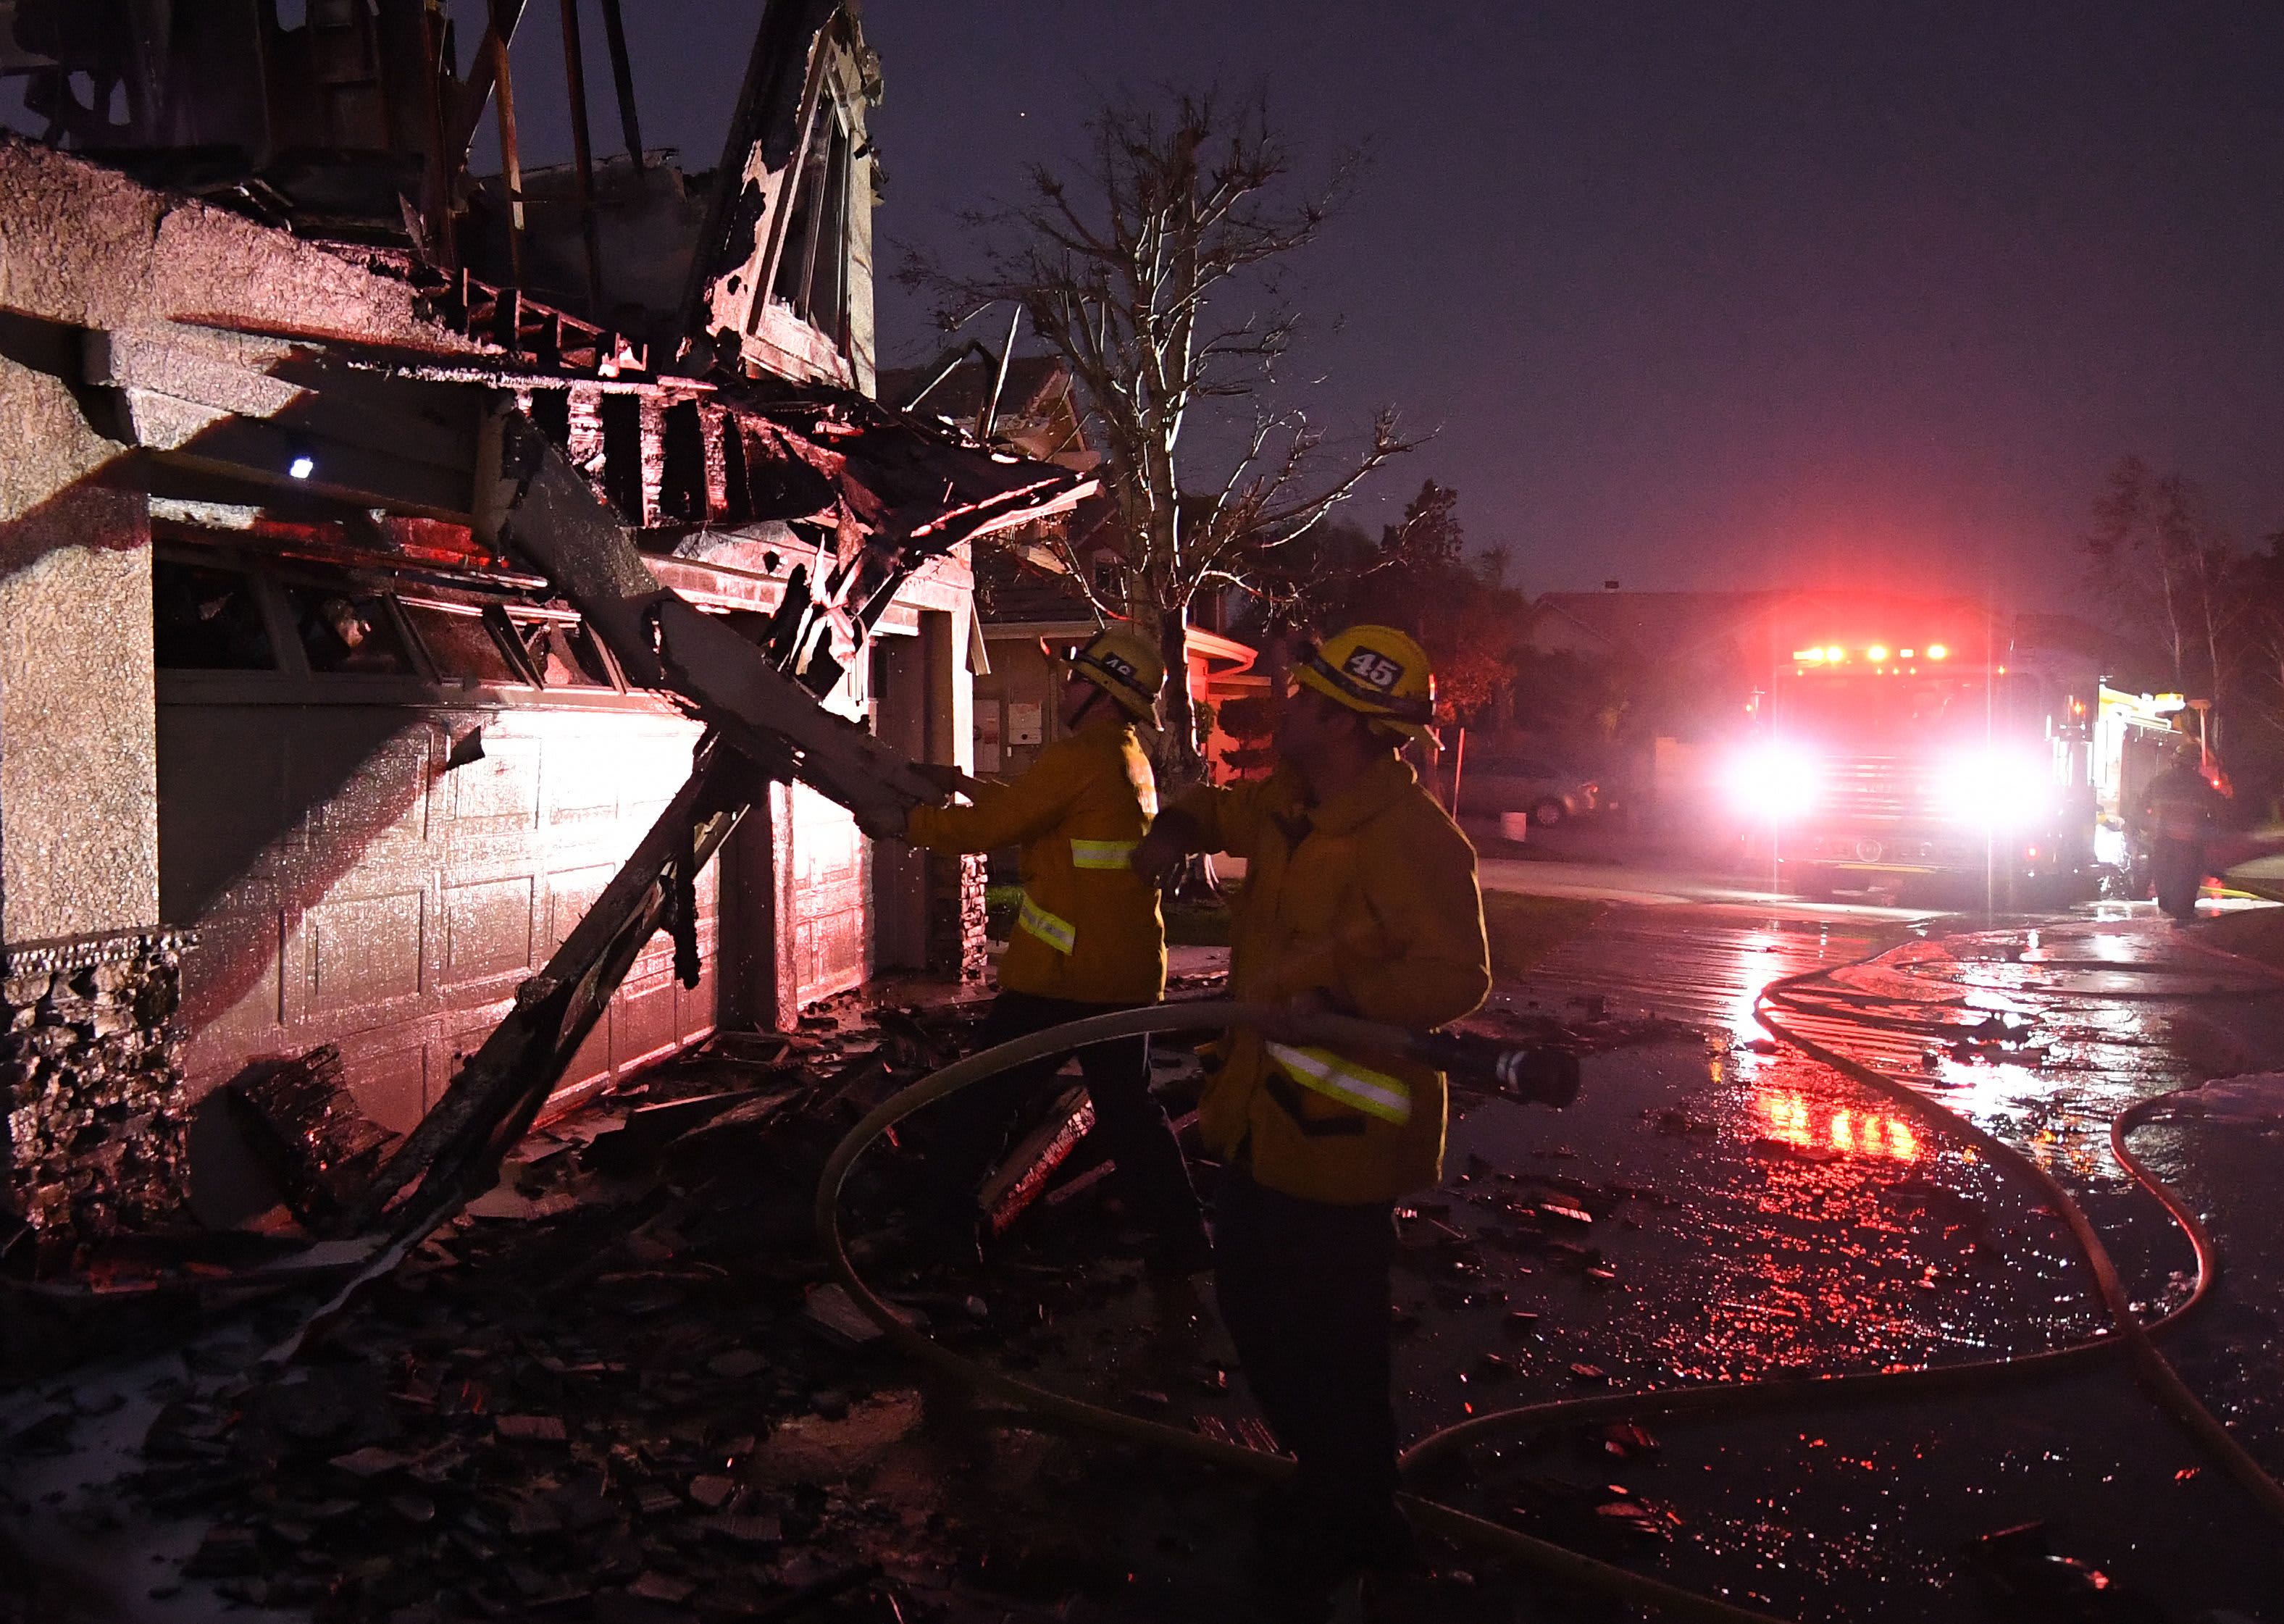 Pg E Rebuked Over Imposing Blackouts In California To Reduce Fire Risk Images, Photos, Reviews